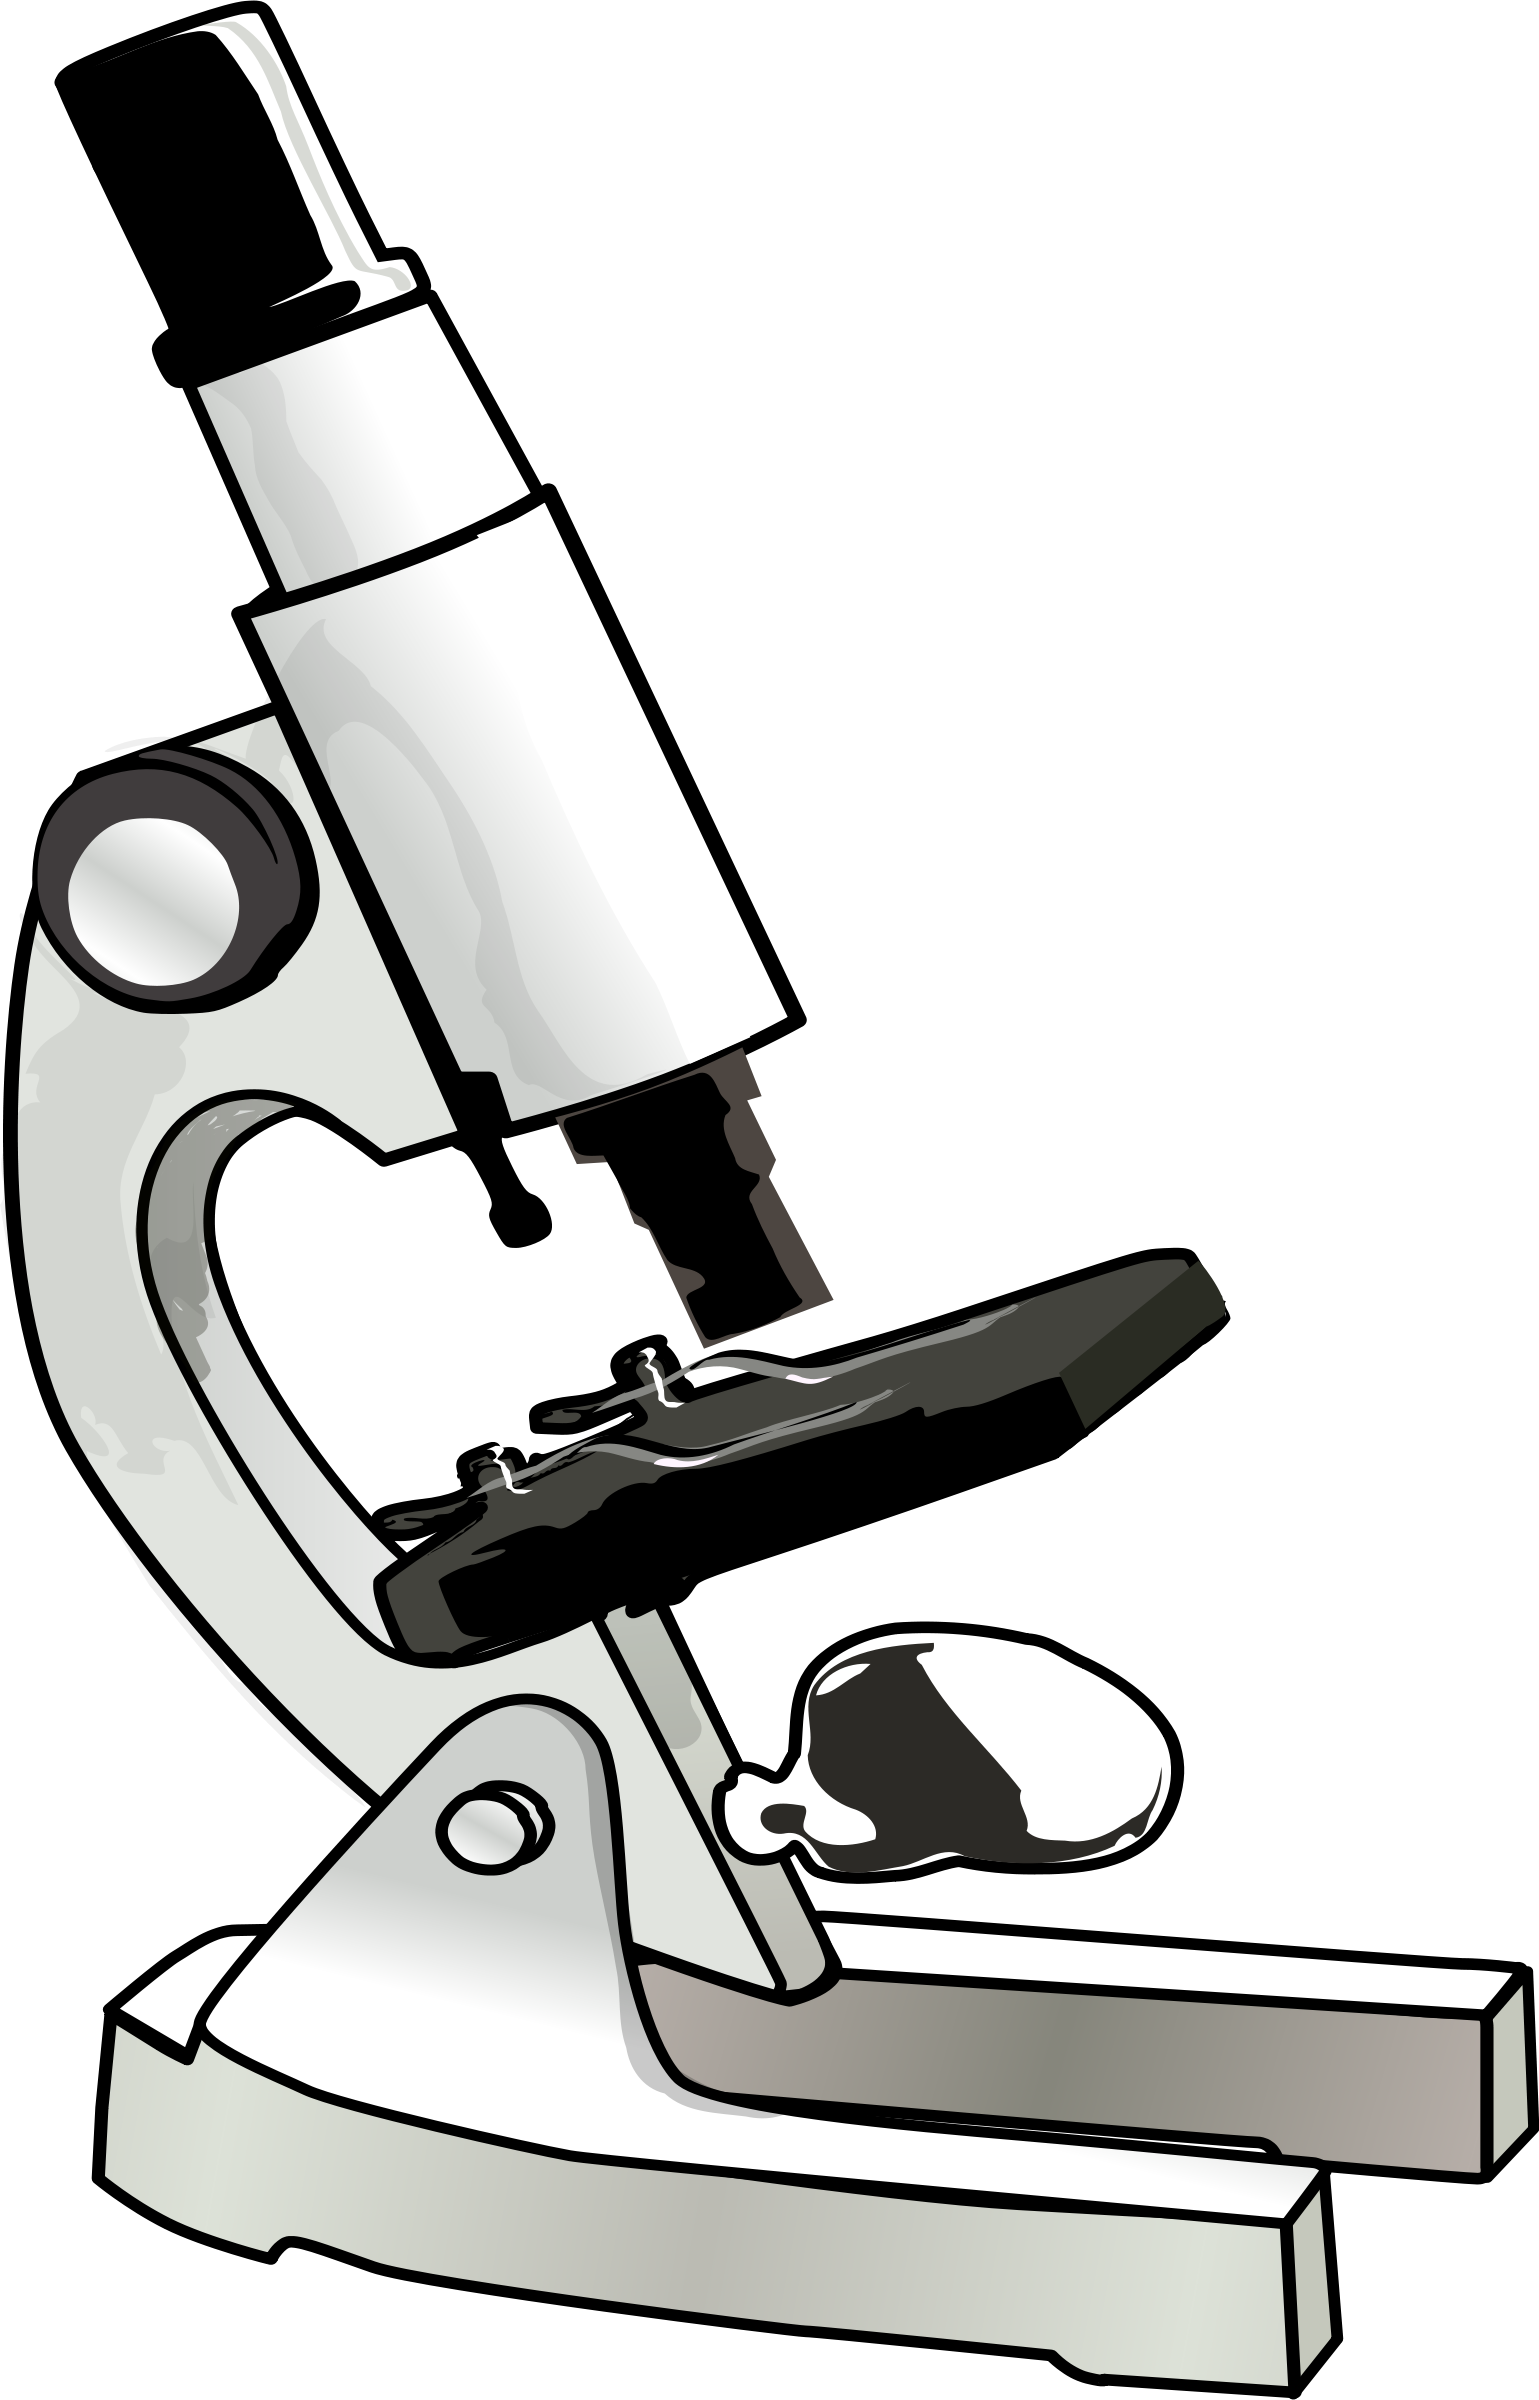 A Diagram Of A Microscope.